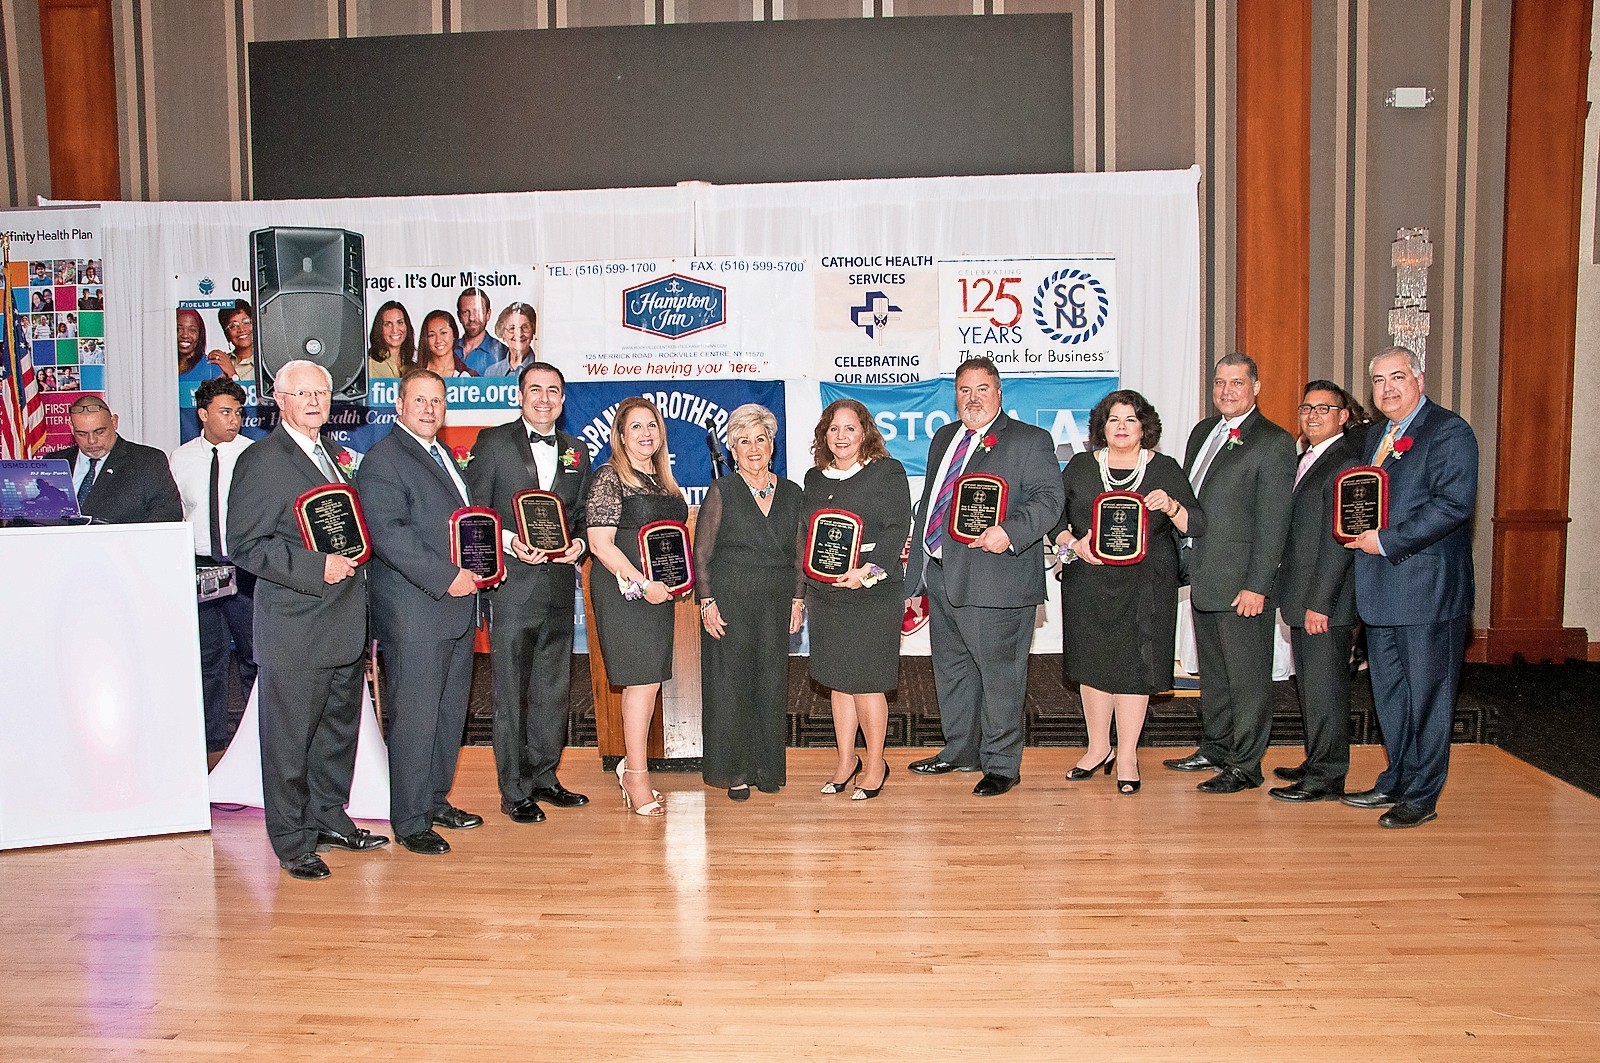 The Hispanic Brotherhood honored many people for their contributions to the community. From left are the Honorable Tom Glynn, Rockville Centre Police Commissioner Gennario, Dr. David Rose, Elizabeth Custodio, Hispanic Brotherhood Director Margarita Grasing, Betty Lugo, Esq., Jorge Gardyn, the three honorees from Fidelis Care, and the Honorable Jorge Martinez.